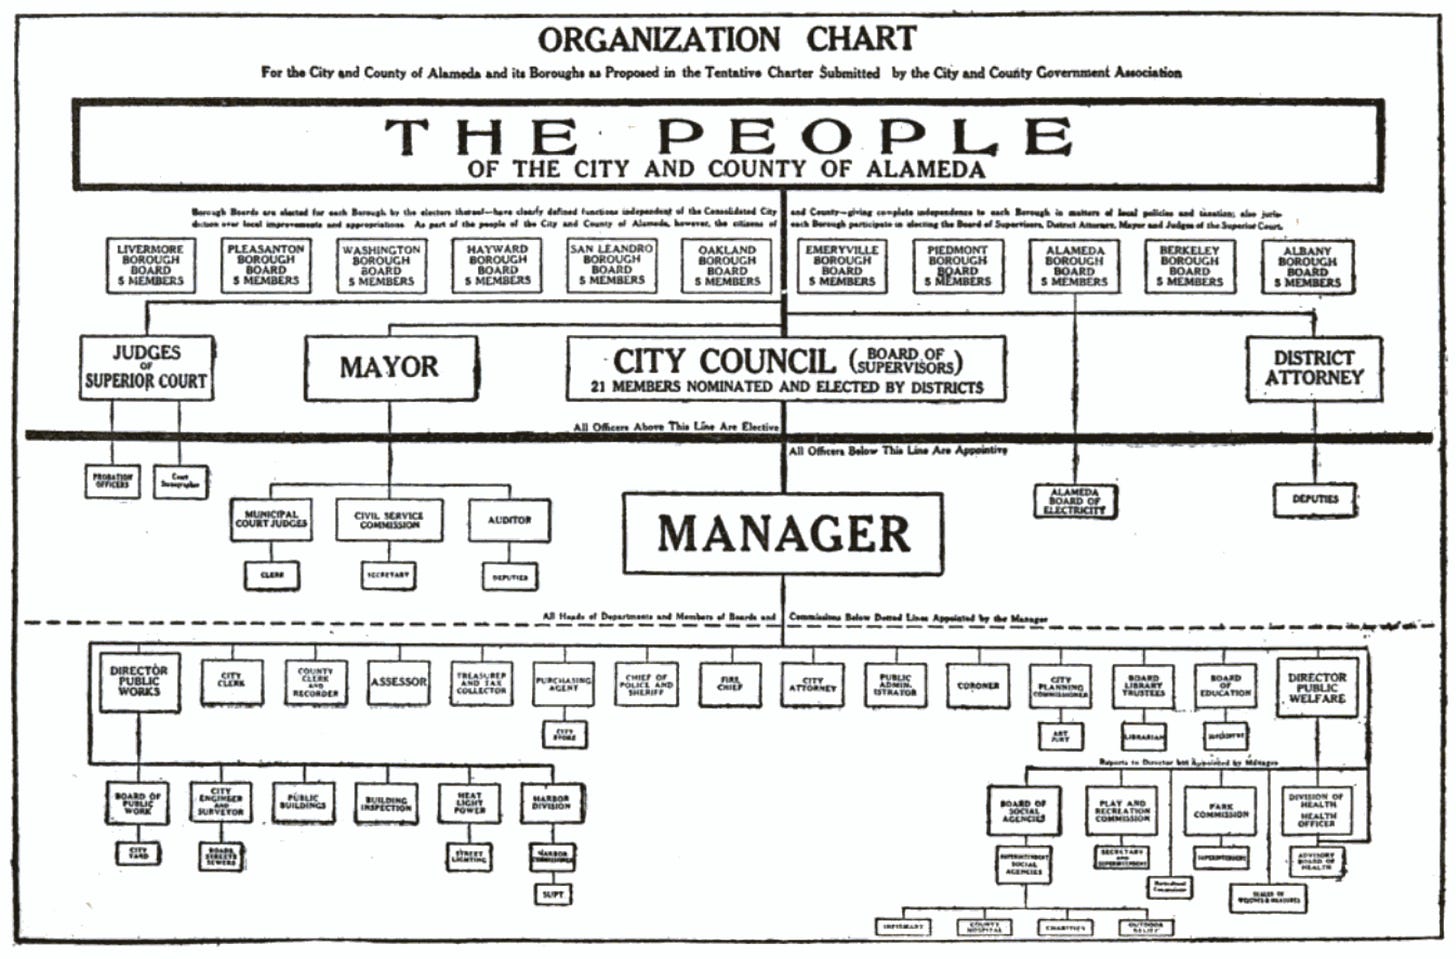 Proposed government organization chart of the City and County of Alameda